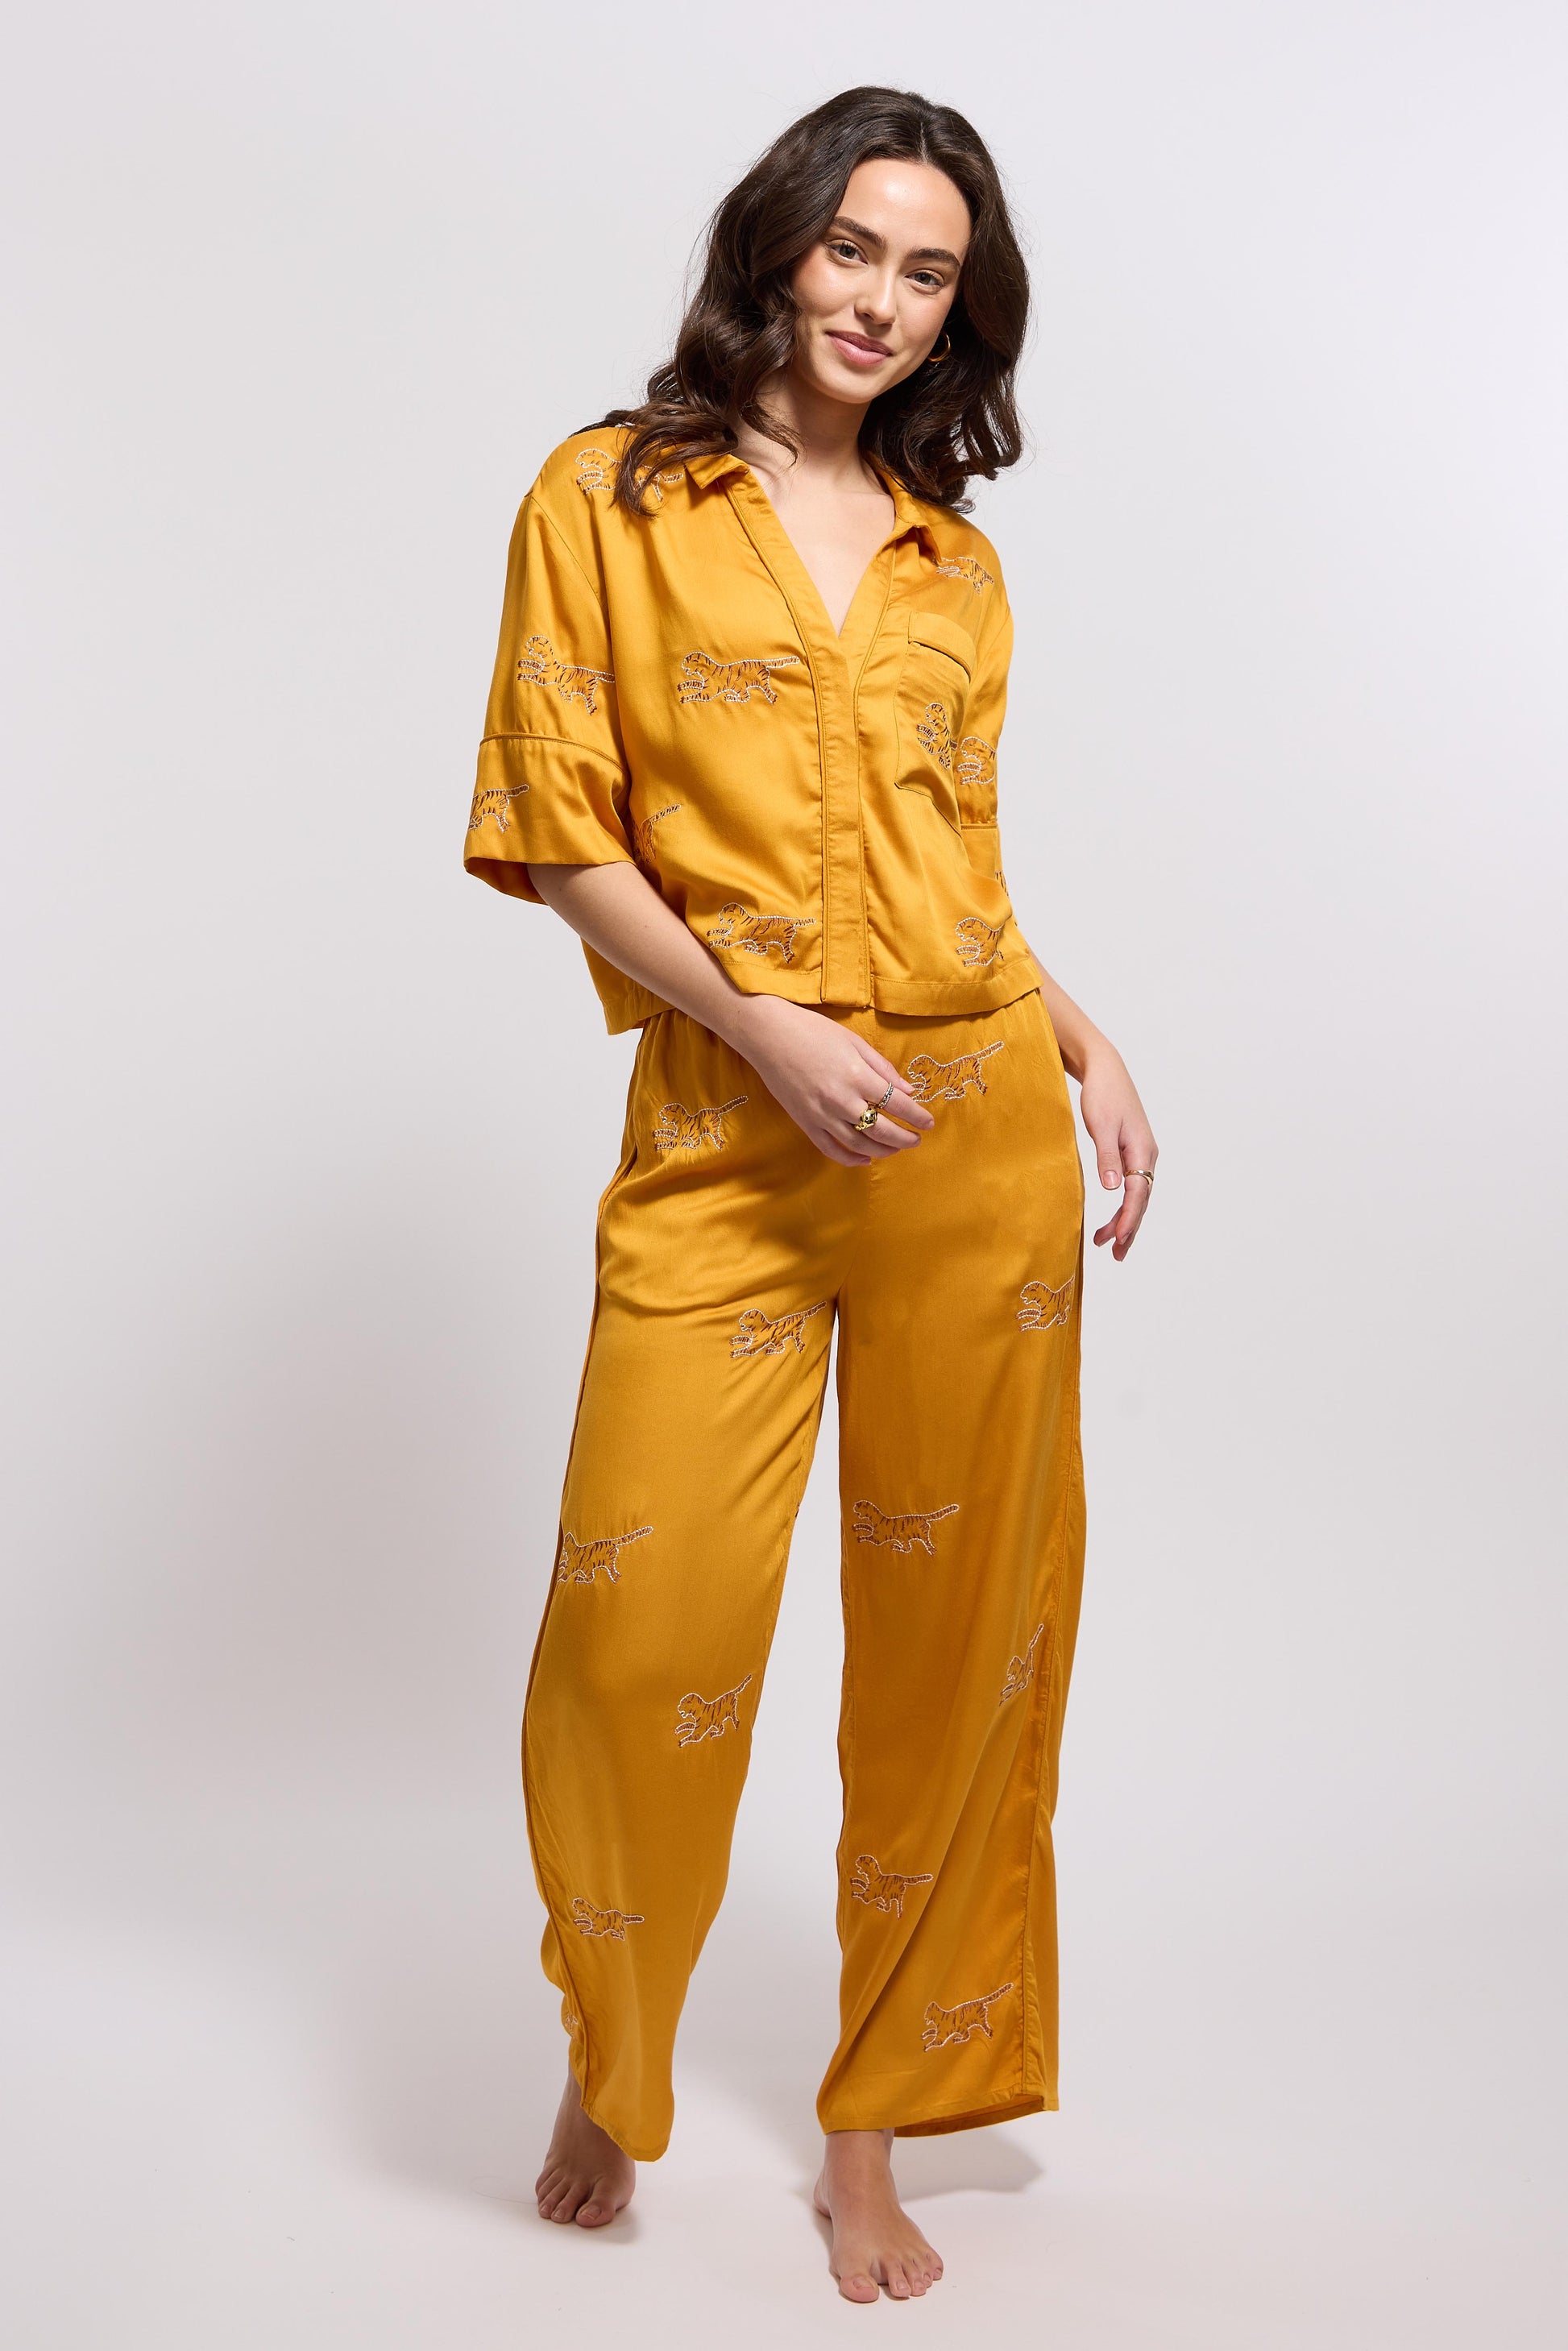 A woman wearing a marigold colored loungewear set with tiger embroidery.